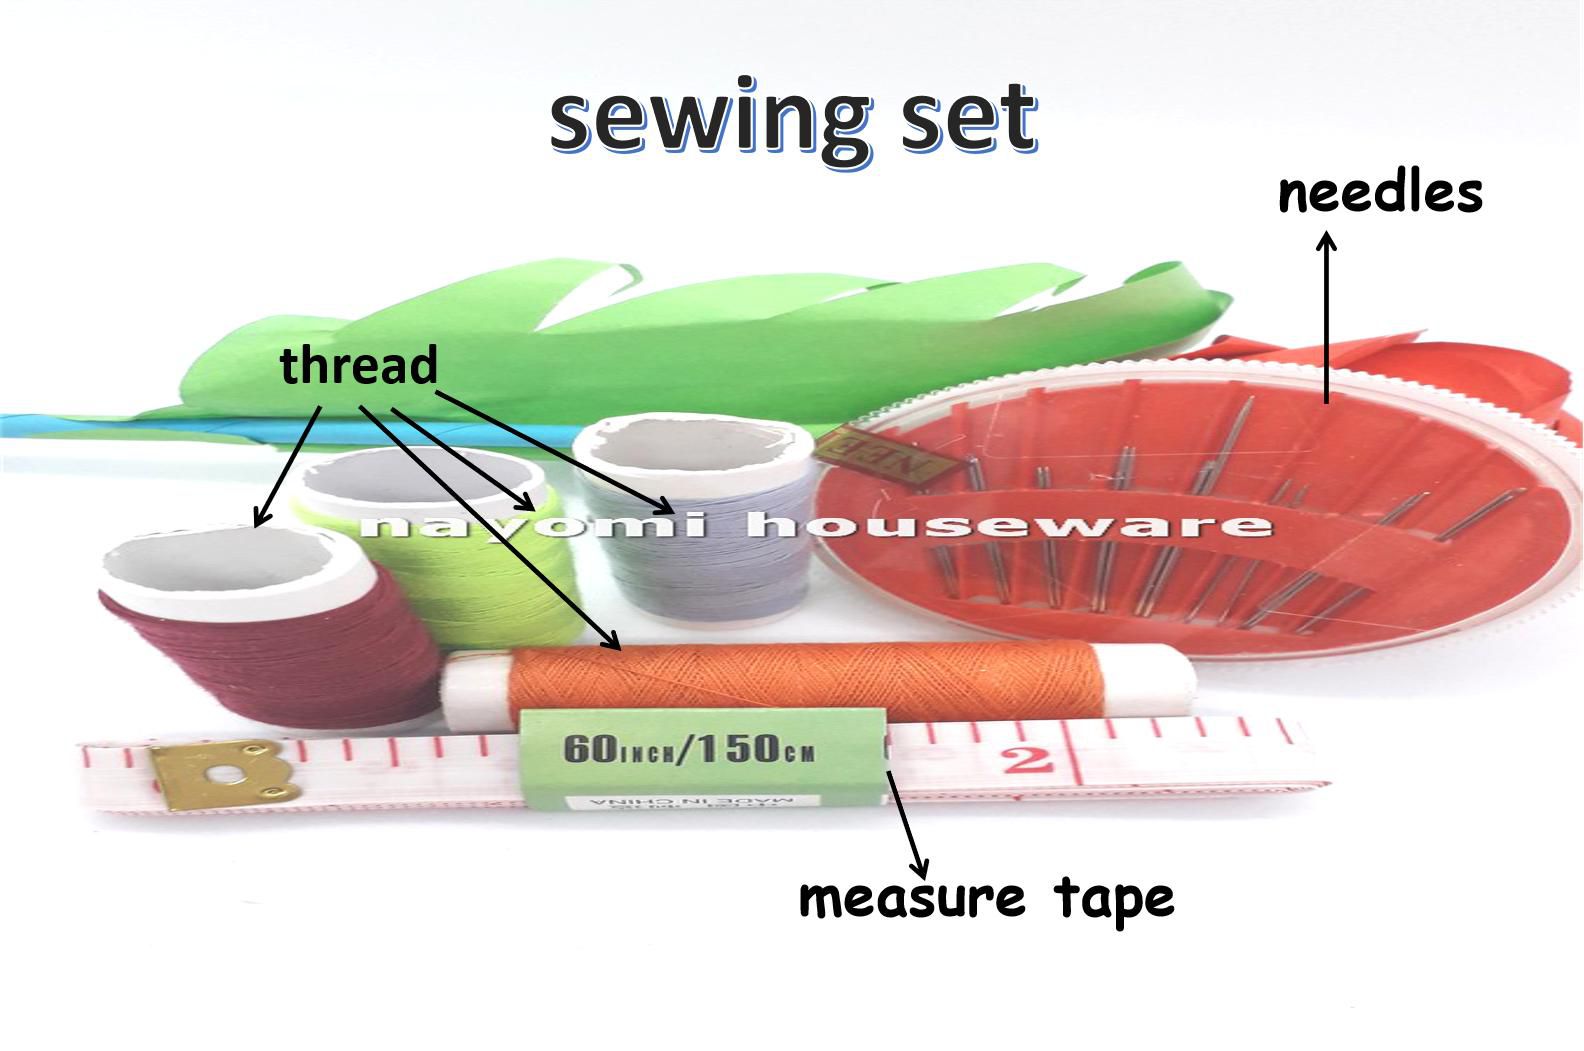 1 Set 3IN1 Sewing Kit with Thread/Needle/Measure Tape (Multi Colors)